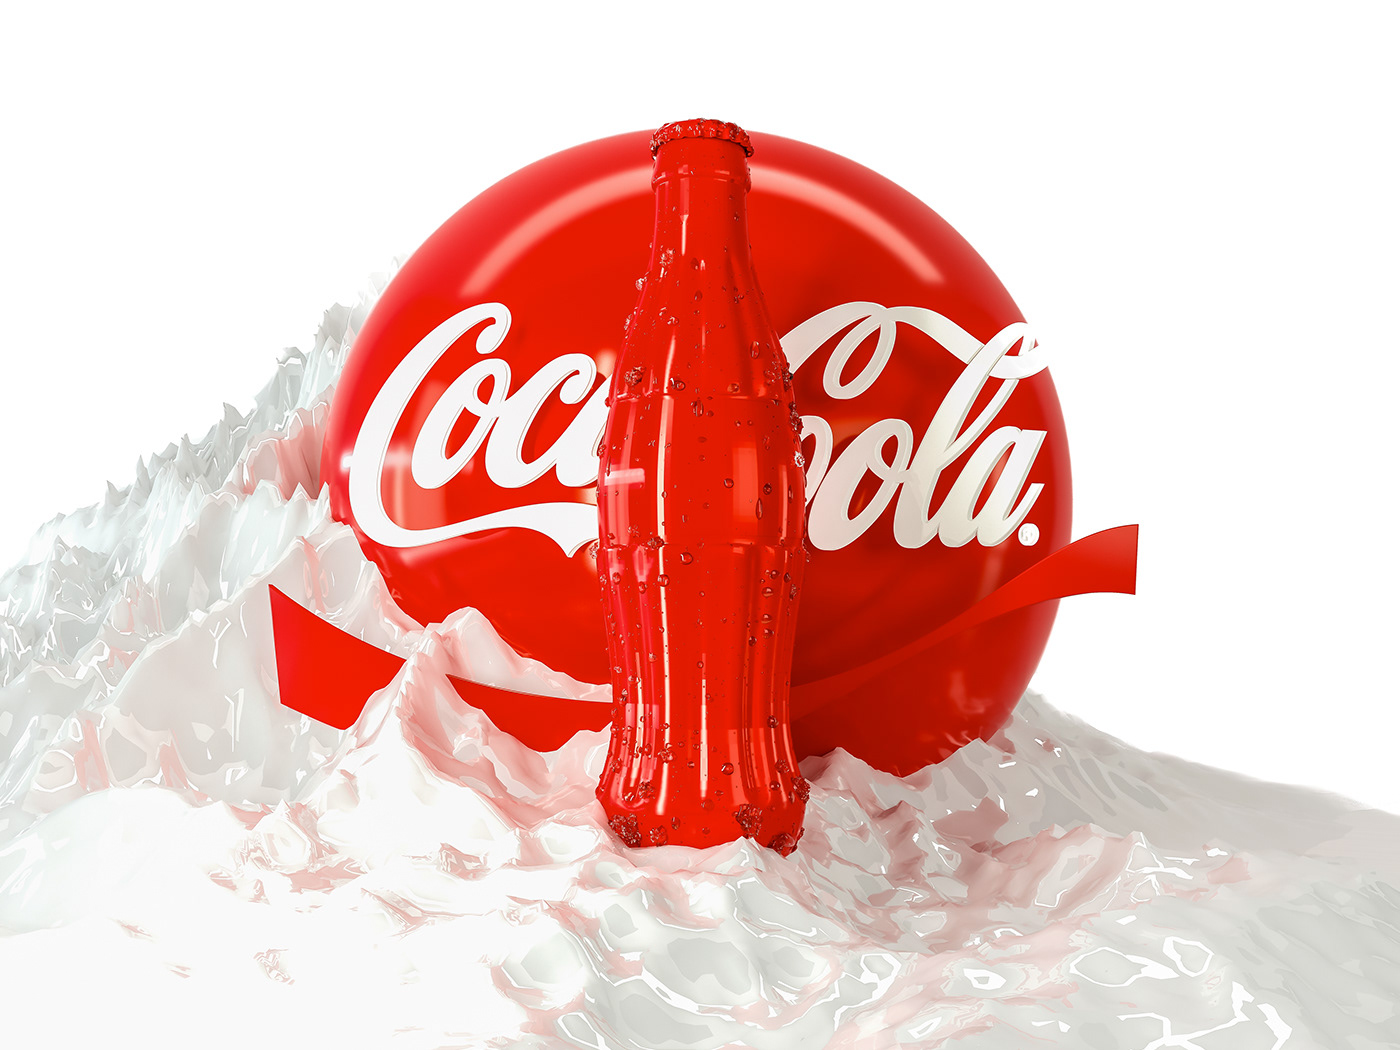 submission for adobe x coke x you.